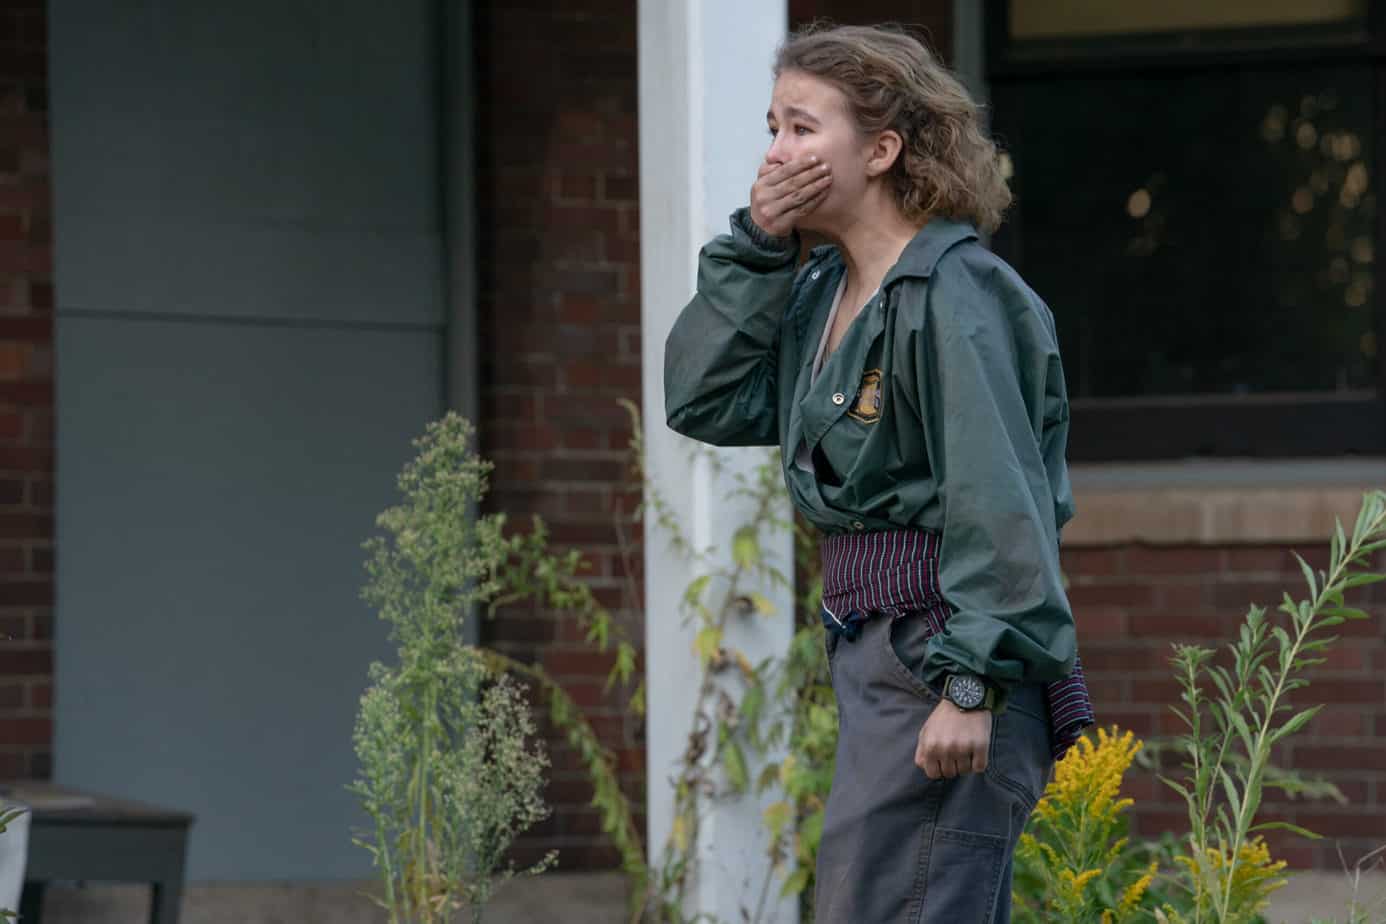 is a quiet place safe for kids to watch?